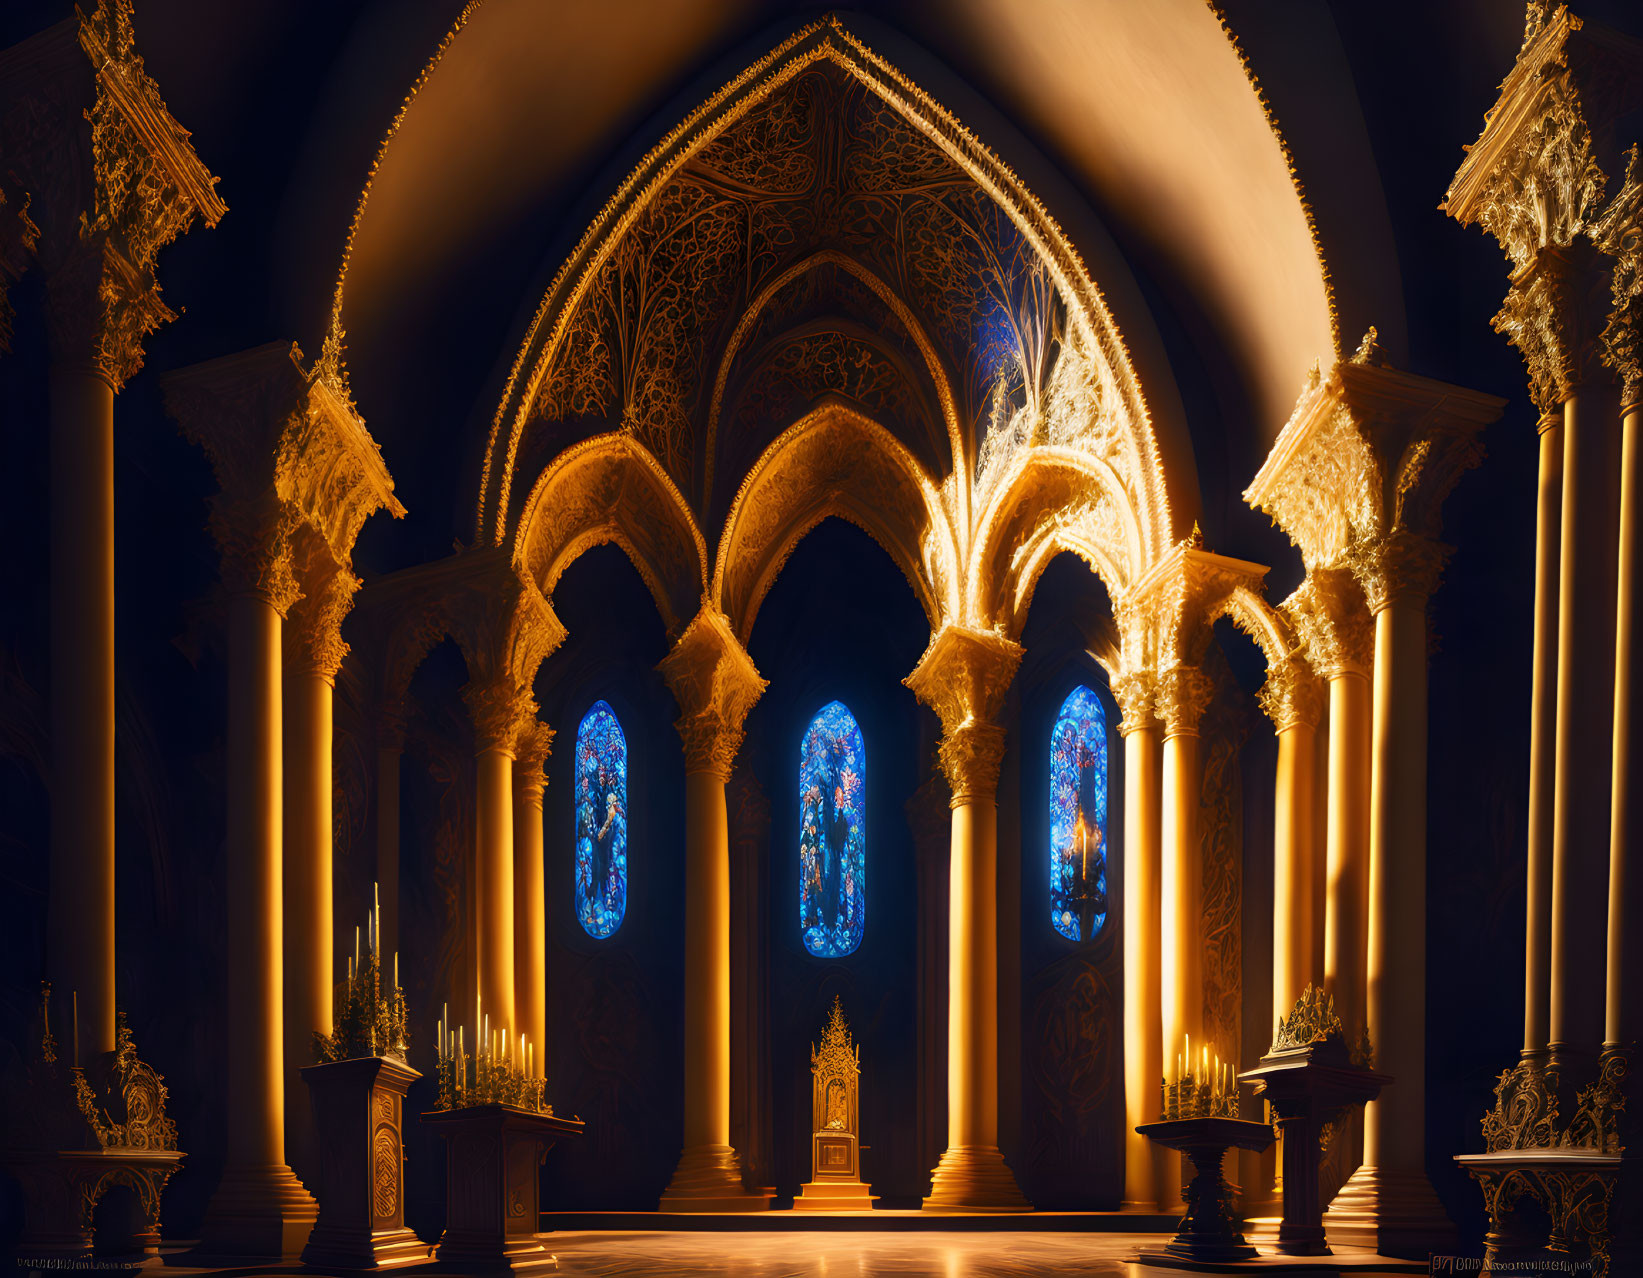 Gothic interior with arches, stained glass, and candles